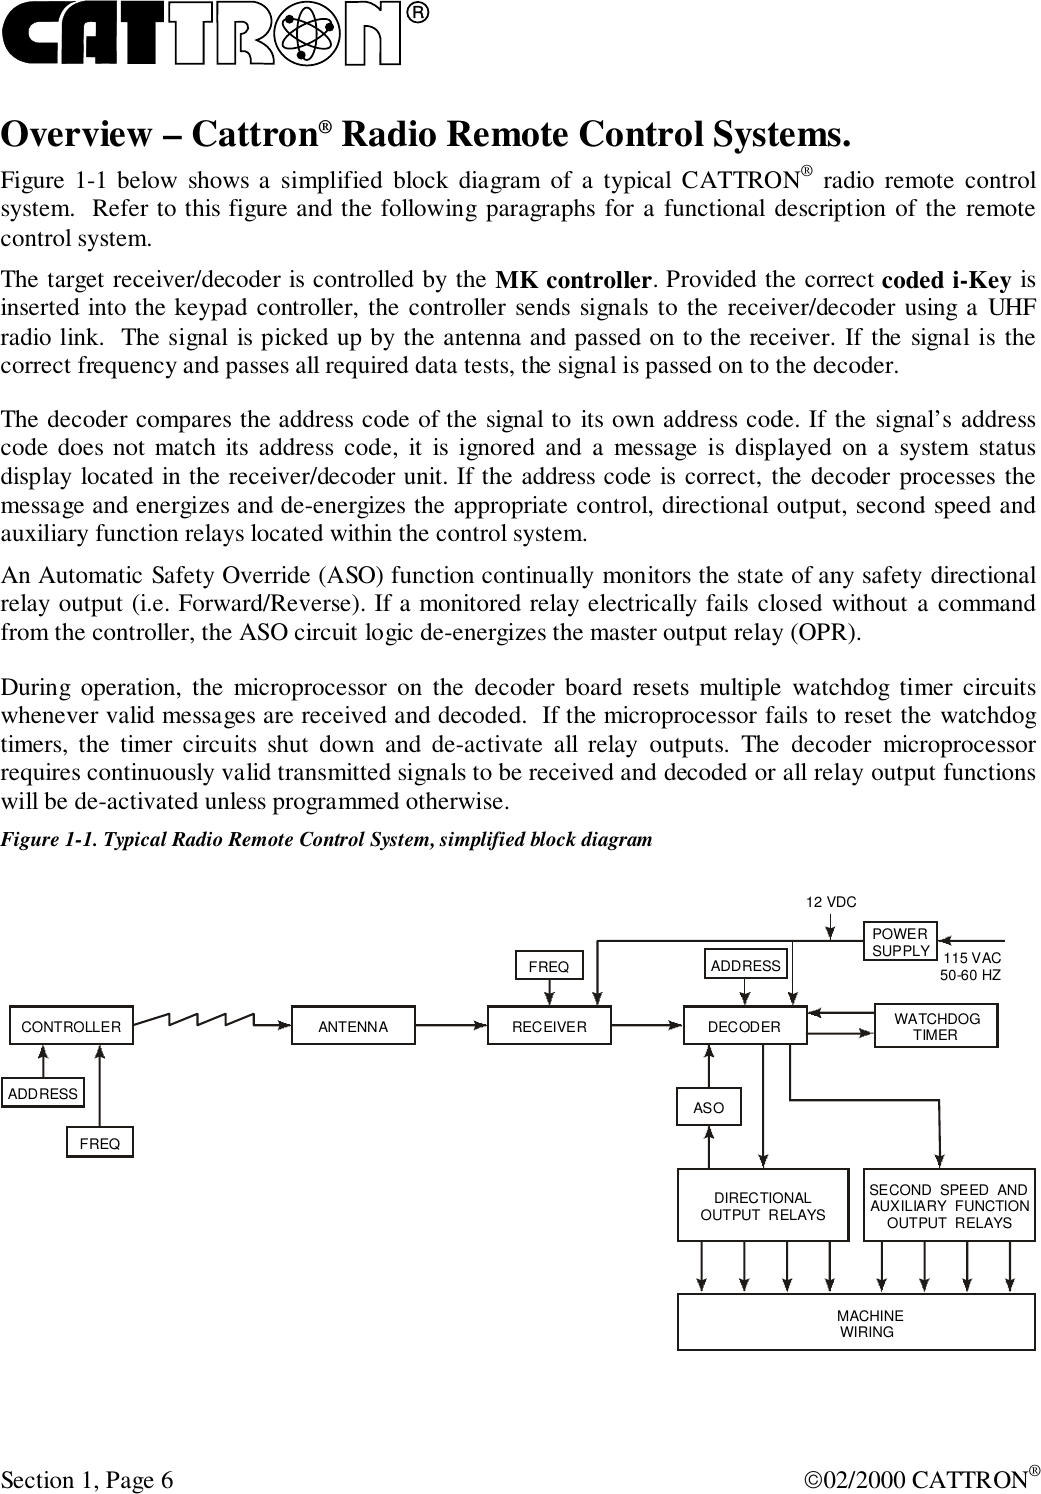 RSection 1, Page 6 02/2000 CATTRON®Overview – Cattron® Radio Remote Control Systems.Figure 1-1 below shows a simplified block diagram of a typical CATTRON® radio remote controlsystem.  Refer to this figure and the following paragraphs for a functional description of the remotecontrol system.The target receiver/decoder is controlled by the MK controller. Provided the correct coded i-Key isinserted into the keypad controller, the controller sends signals to the receiver/decoder using a UHFradio link.  The signal is picked up by the antenna and passed on to the receiver. If the signal is thecorrect frequency and passes all required data tests, the signal is passed on to the decoder.The decoder compares the address code of the signal to its own address code. If the signal’s addresscode does not match its address code, it is ignored and a message is displayed on a system statusdisplay located in the receiver/decoder unit. If the address code is correct, the decoder processes themessage and energizes and de-energizes the appropriate control, directional output, second speed andauxiliary function relays located within the control system.An Automatic Safety Override (ASO) function continually monitors the state of any safety directionalrelay output (i.e. Forward/Reverse). If a monitored relay electrically fails closed without a commandfrom the controller, the ASO circuit logic de-energizes the master output relay (OPR).During operation, the microprocessor on the decoder board resets multiple watchdog timer circuitswhenever valid messages are received and decoded.  If the microprocessor fails to reset the watchdogtimers, the timer circuits shut down and de-activate all relay outputs. The decoder microprocessorrequires continuously valid transmitted signals to be received and decoded or all relay output functionswill be de-activated unless programmed otherwise.Figure 1-1. Typical Radio Remote Control System, simplified block diagramCONTROLLERADDRESSADDRESSFREQANTENNAFREQRECEIVER DECODER12 VDCPOWERSUPPLYWATCHDOGTIMER115 VAC50-60 HZDIRECTIONALOUTPUT  RELAYSSECOND  SPEED  ANDAUXILIARY  FUNCTIONOUTPUT  RELAYSMACHINEWIRINGASO